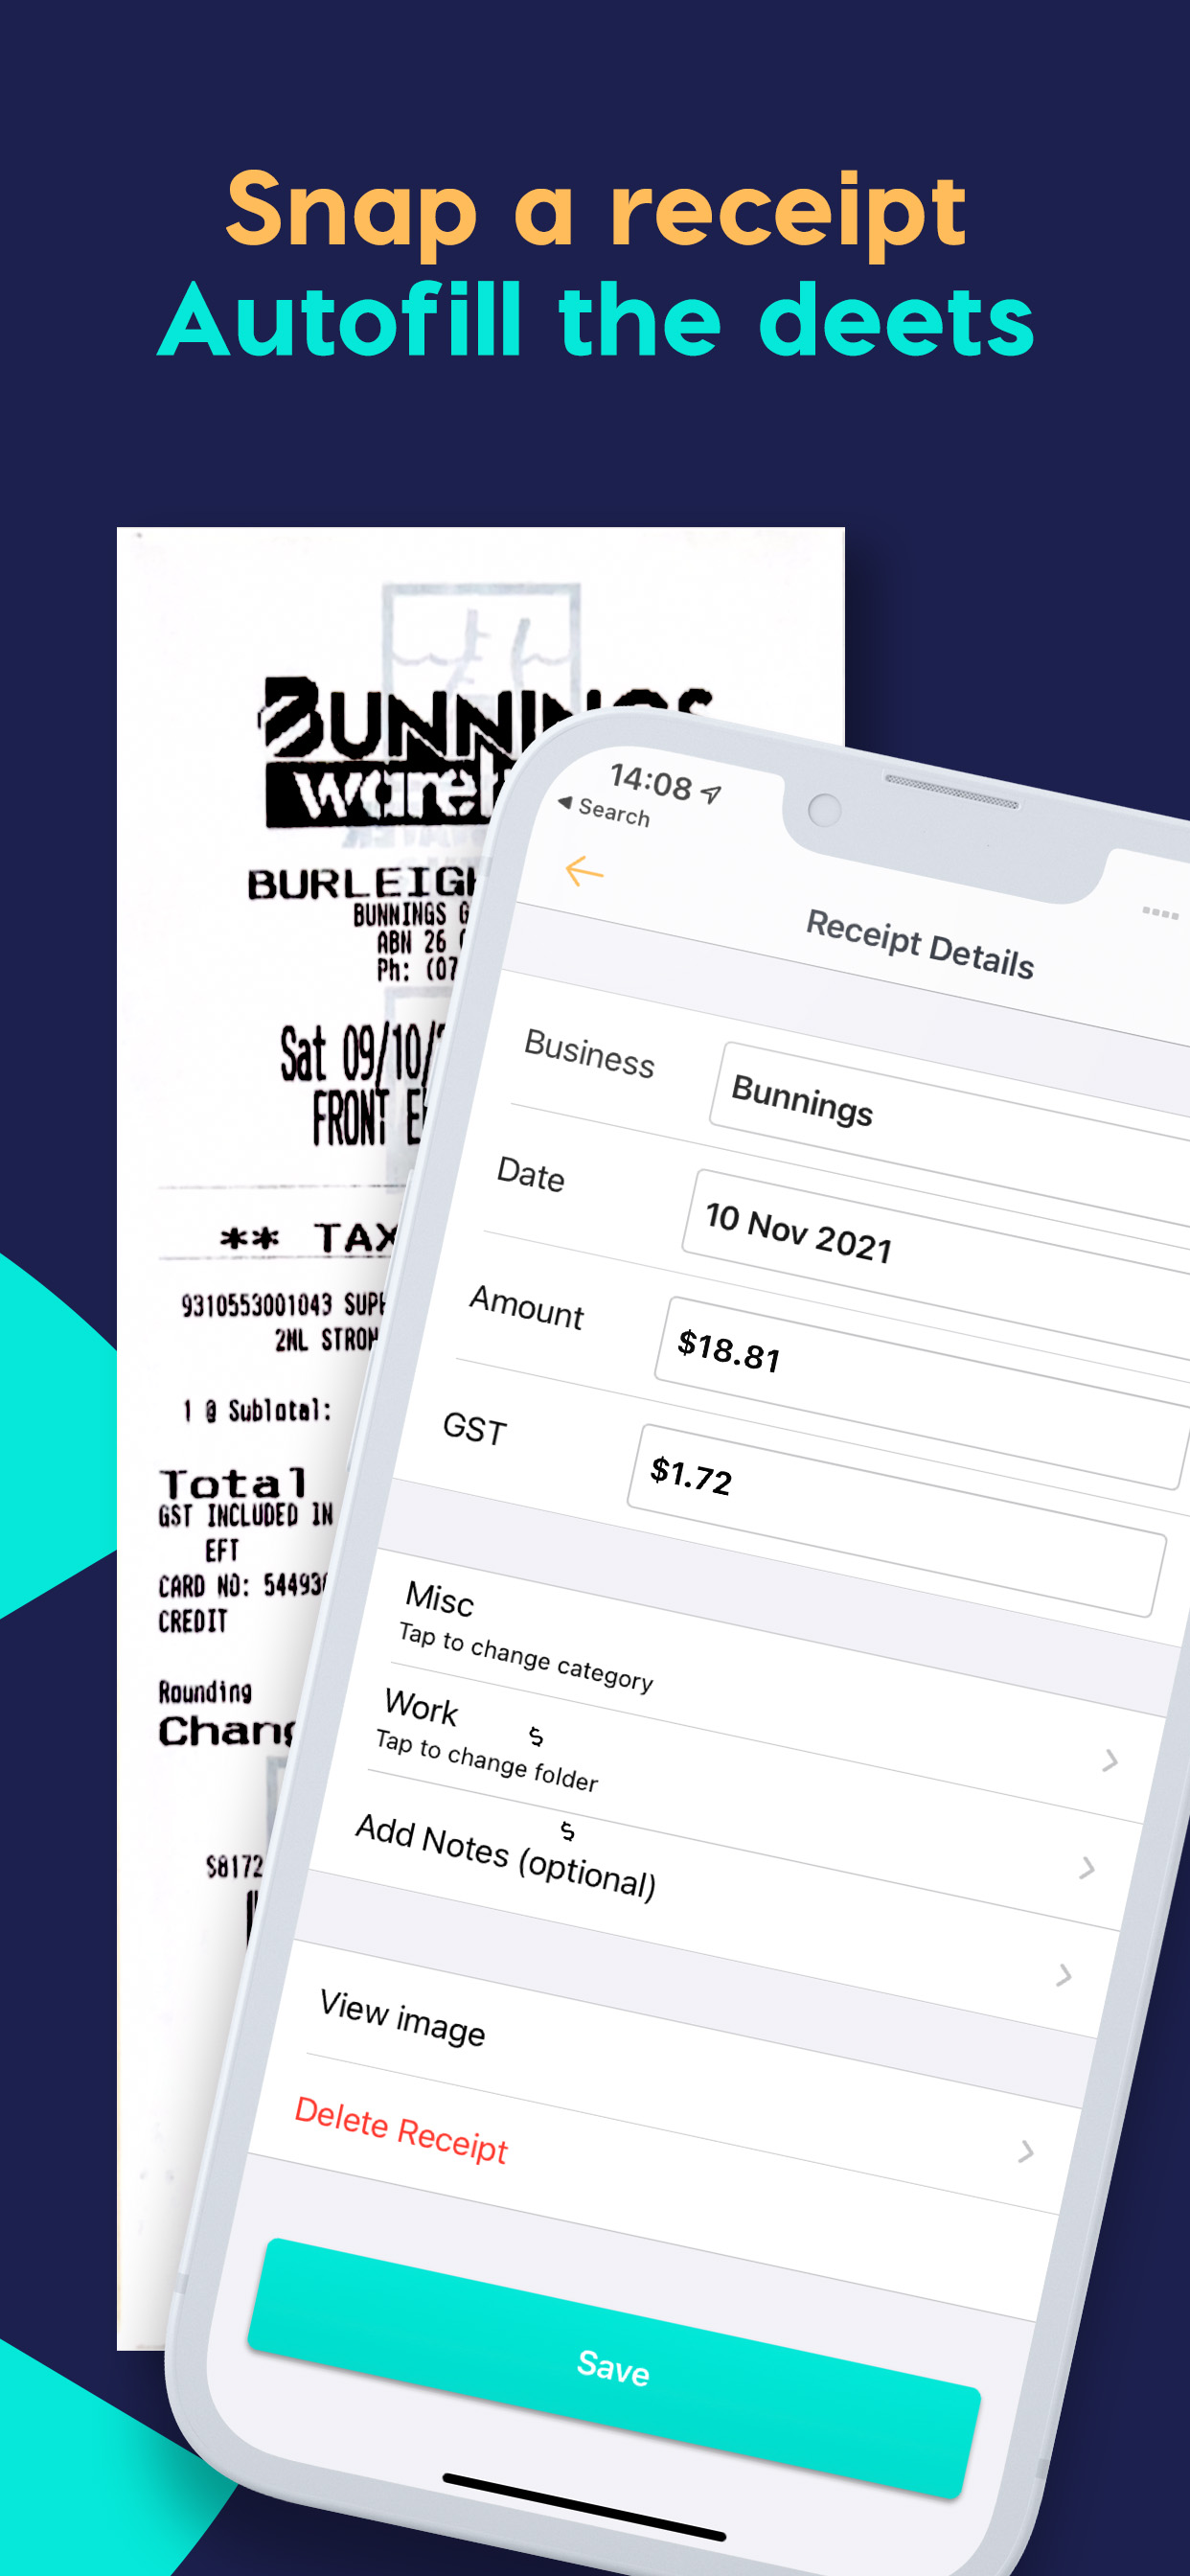 Crunchr - Snap a receipt and autofill the deets within seconds